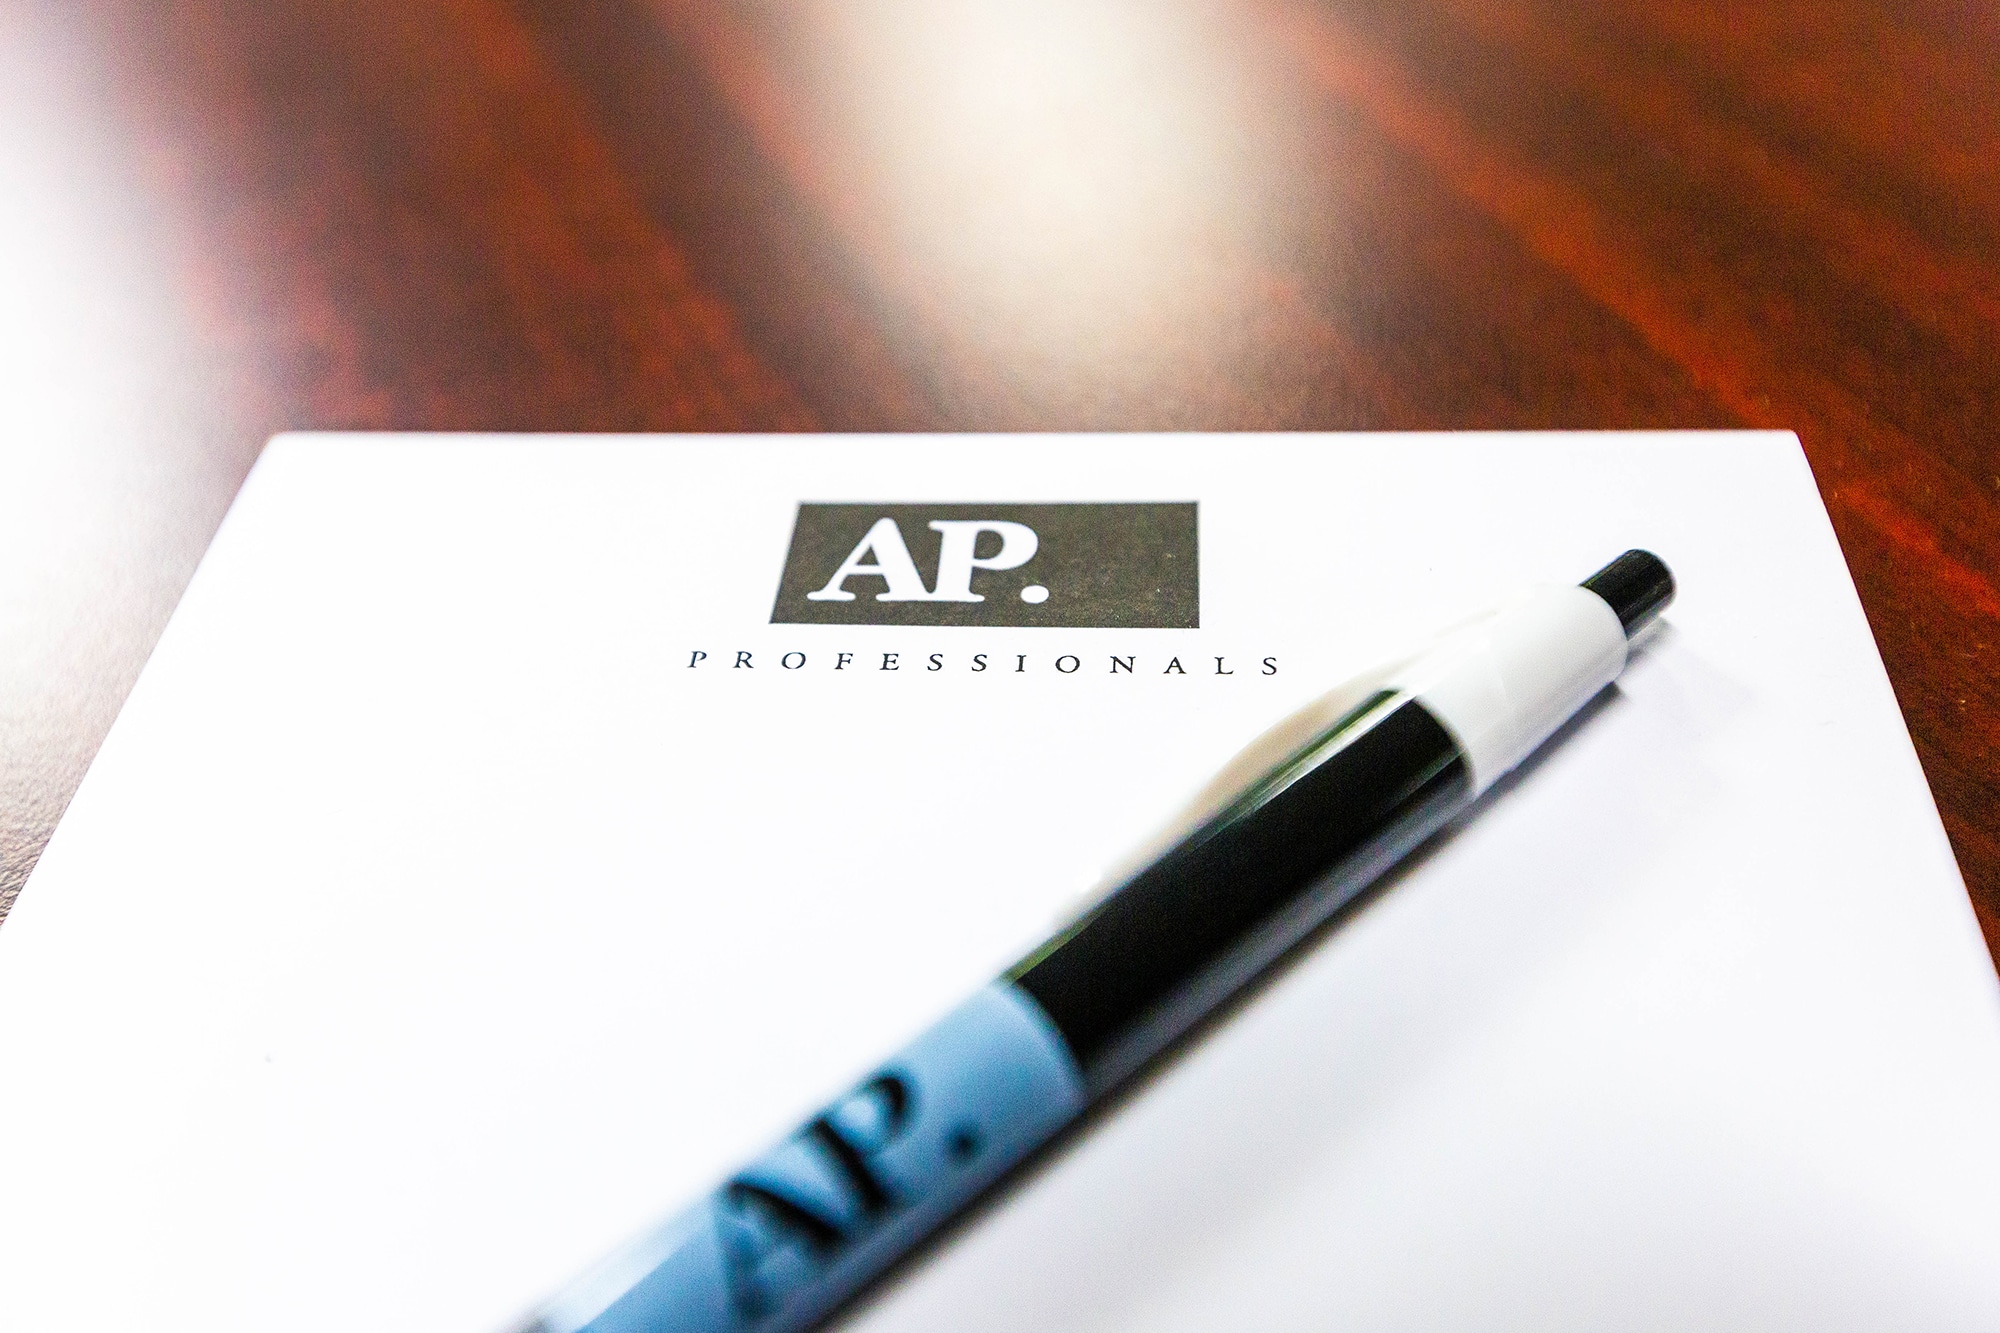 AP Professionals branded notepad